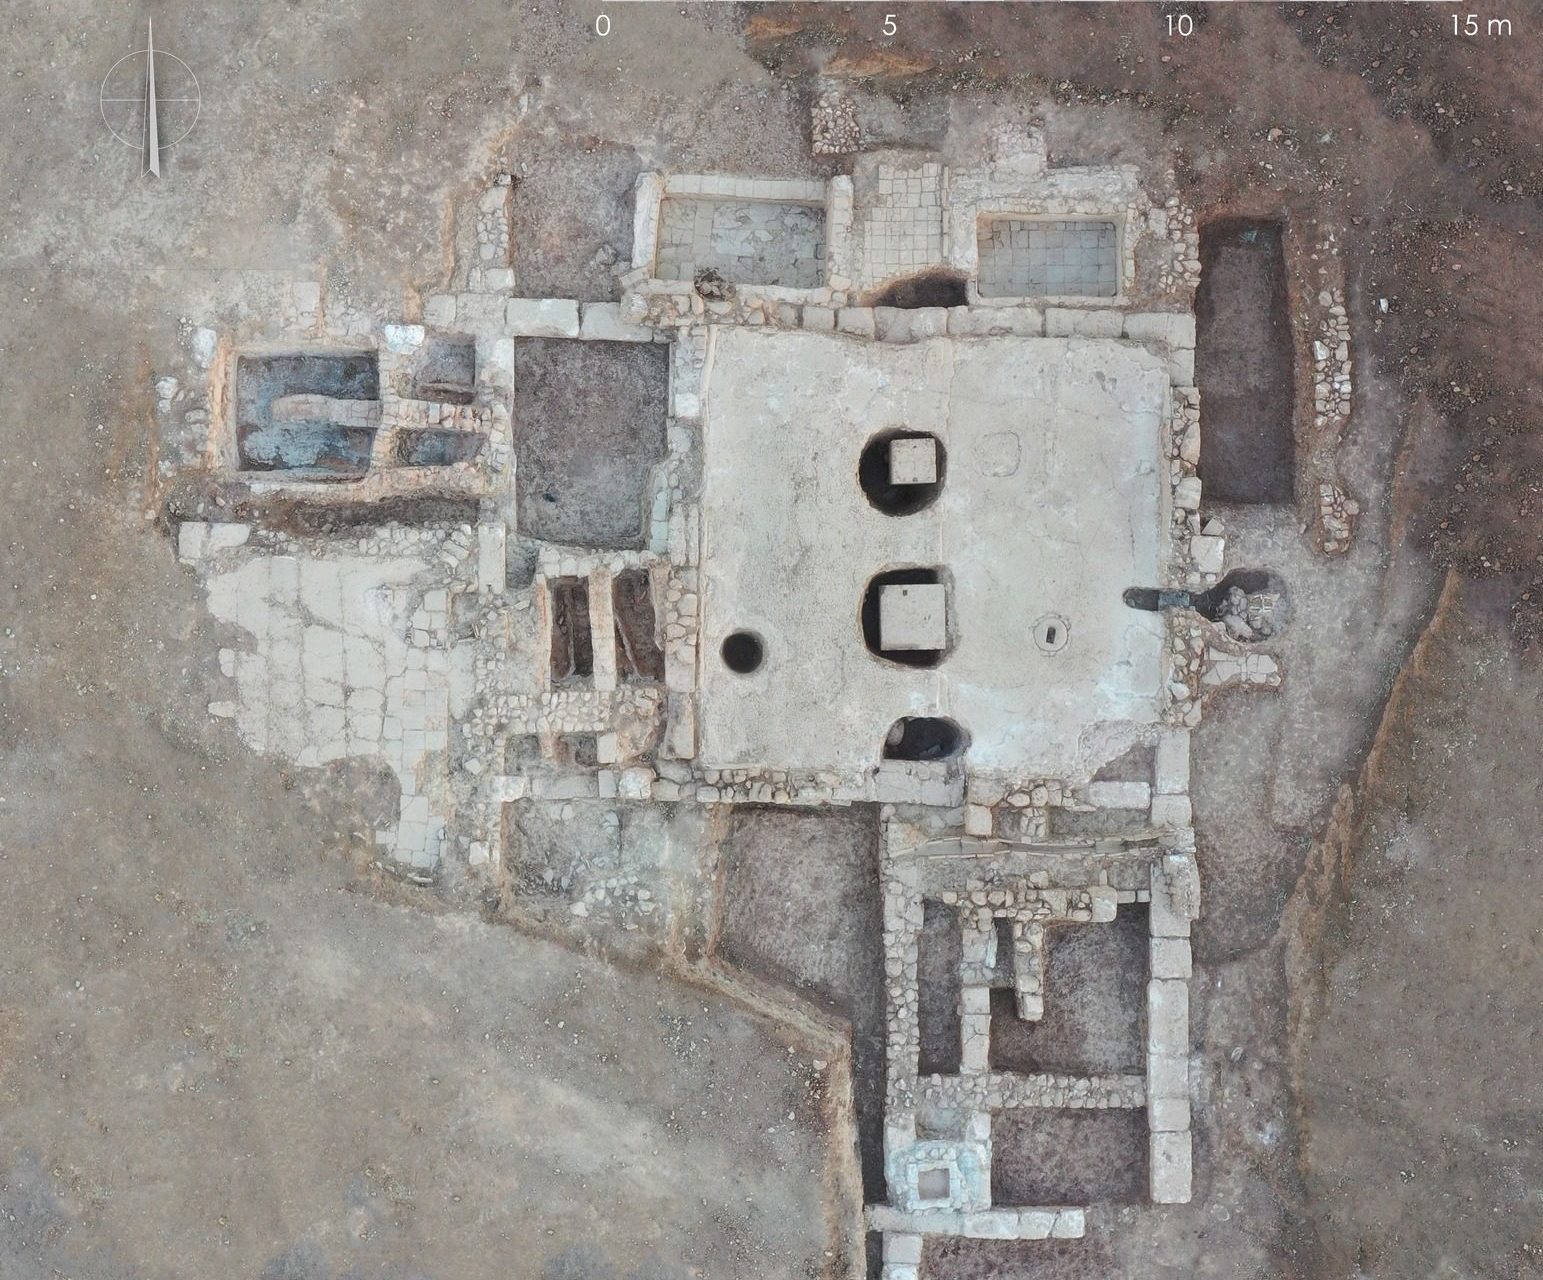 Aerial view of excavations at the site of ancient Tenea